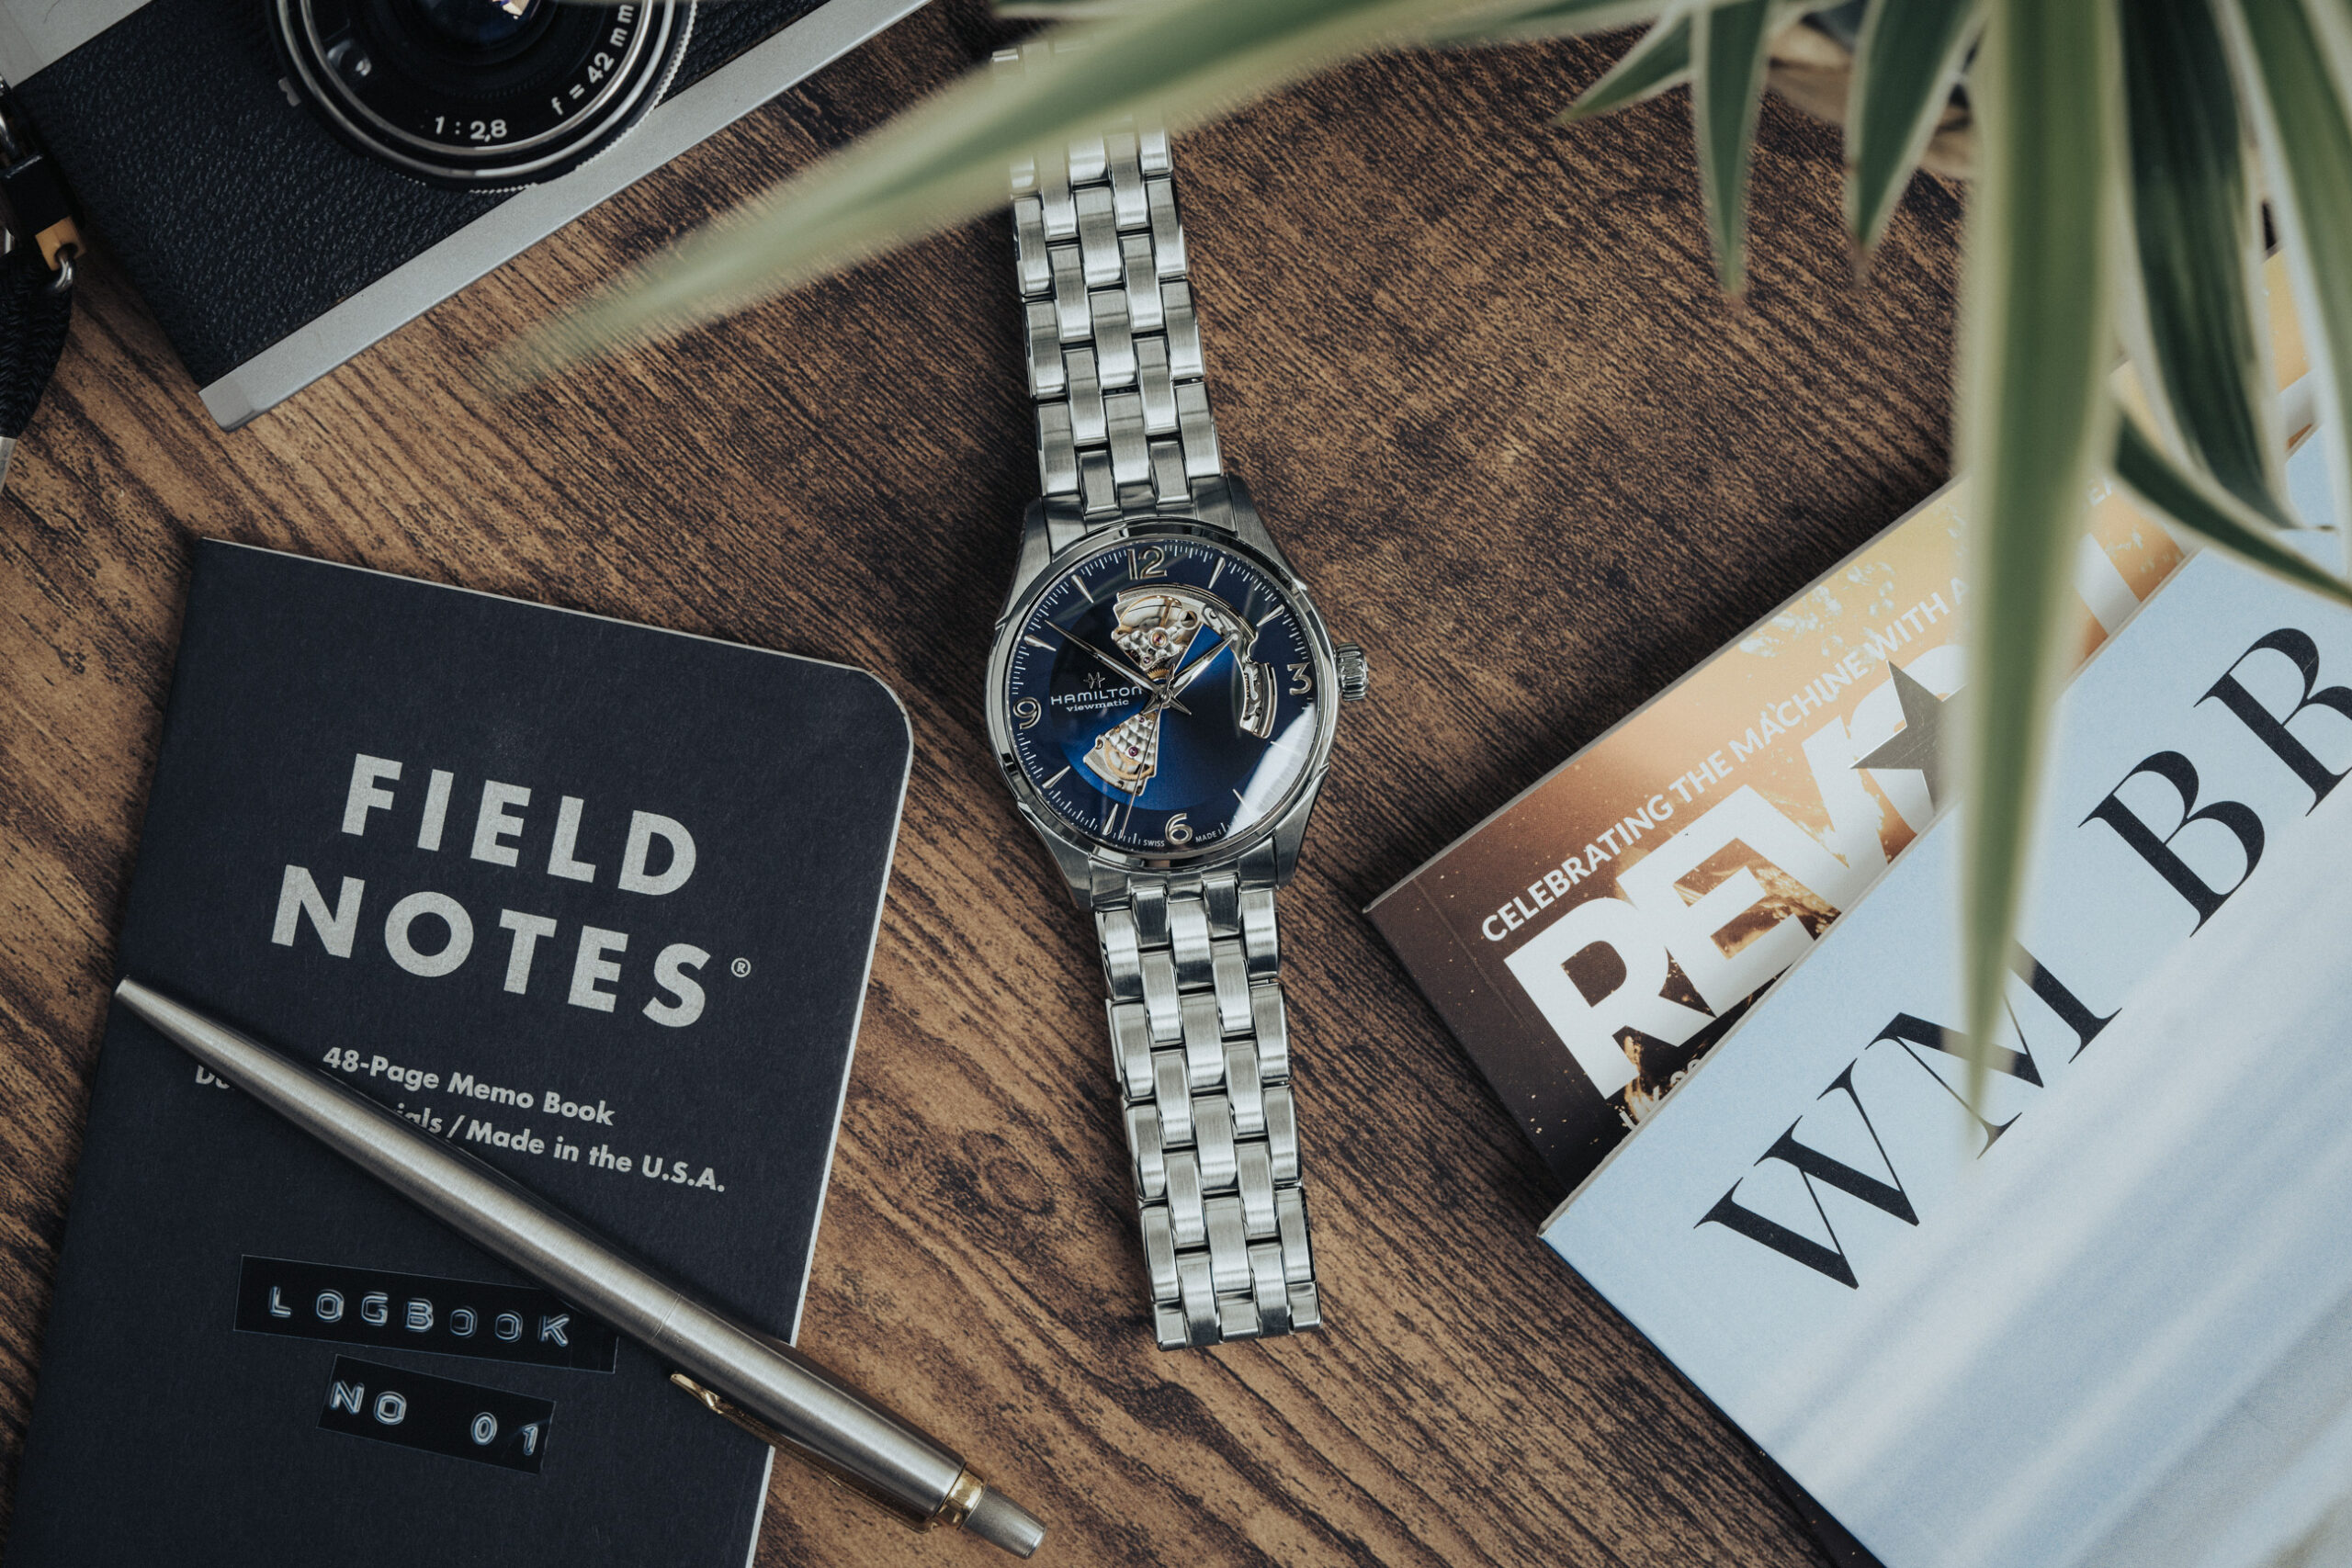 Hamilton Jazzmaster open-heart automatic with blue dial on table with revolution magazine and wm brown magazine, beside is a field notes book and pen and film camera